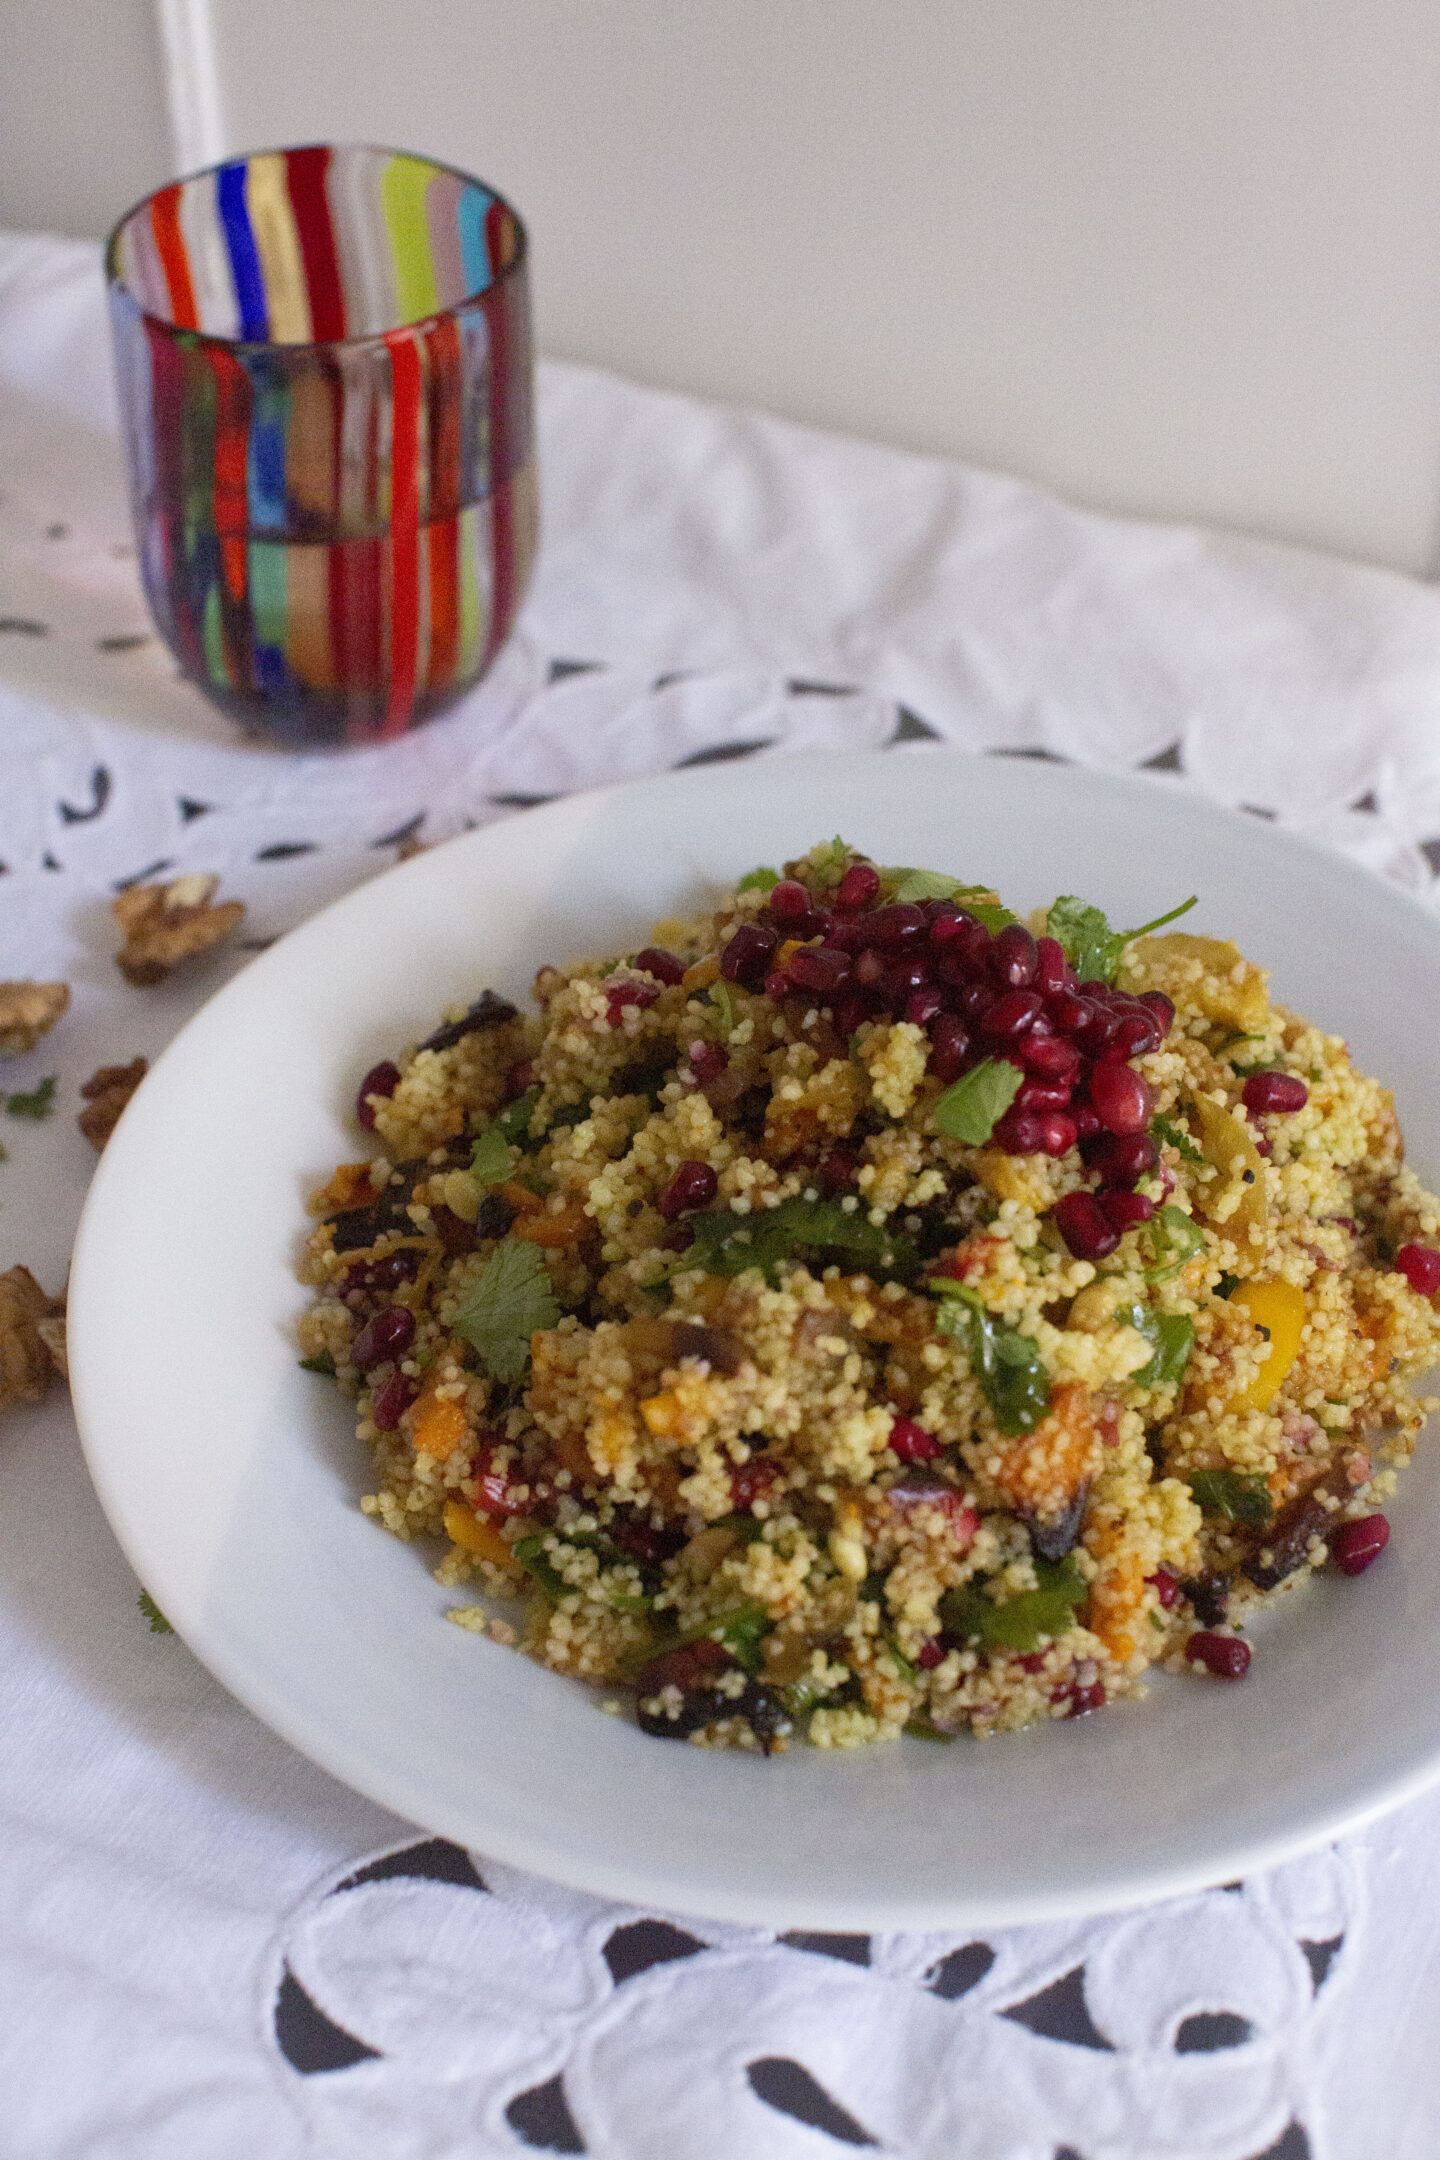 WINTER COUSCOUS WITH ROASTED VEGETABLES AND PESTO